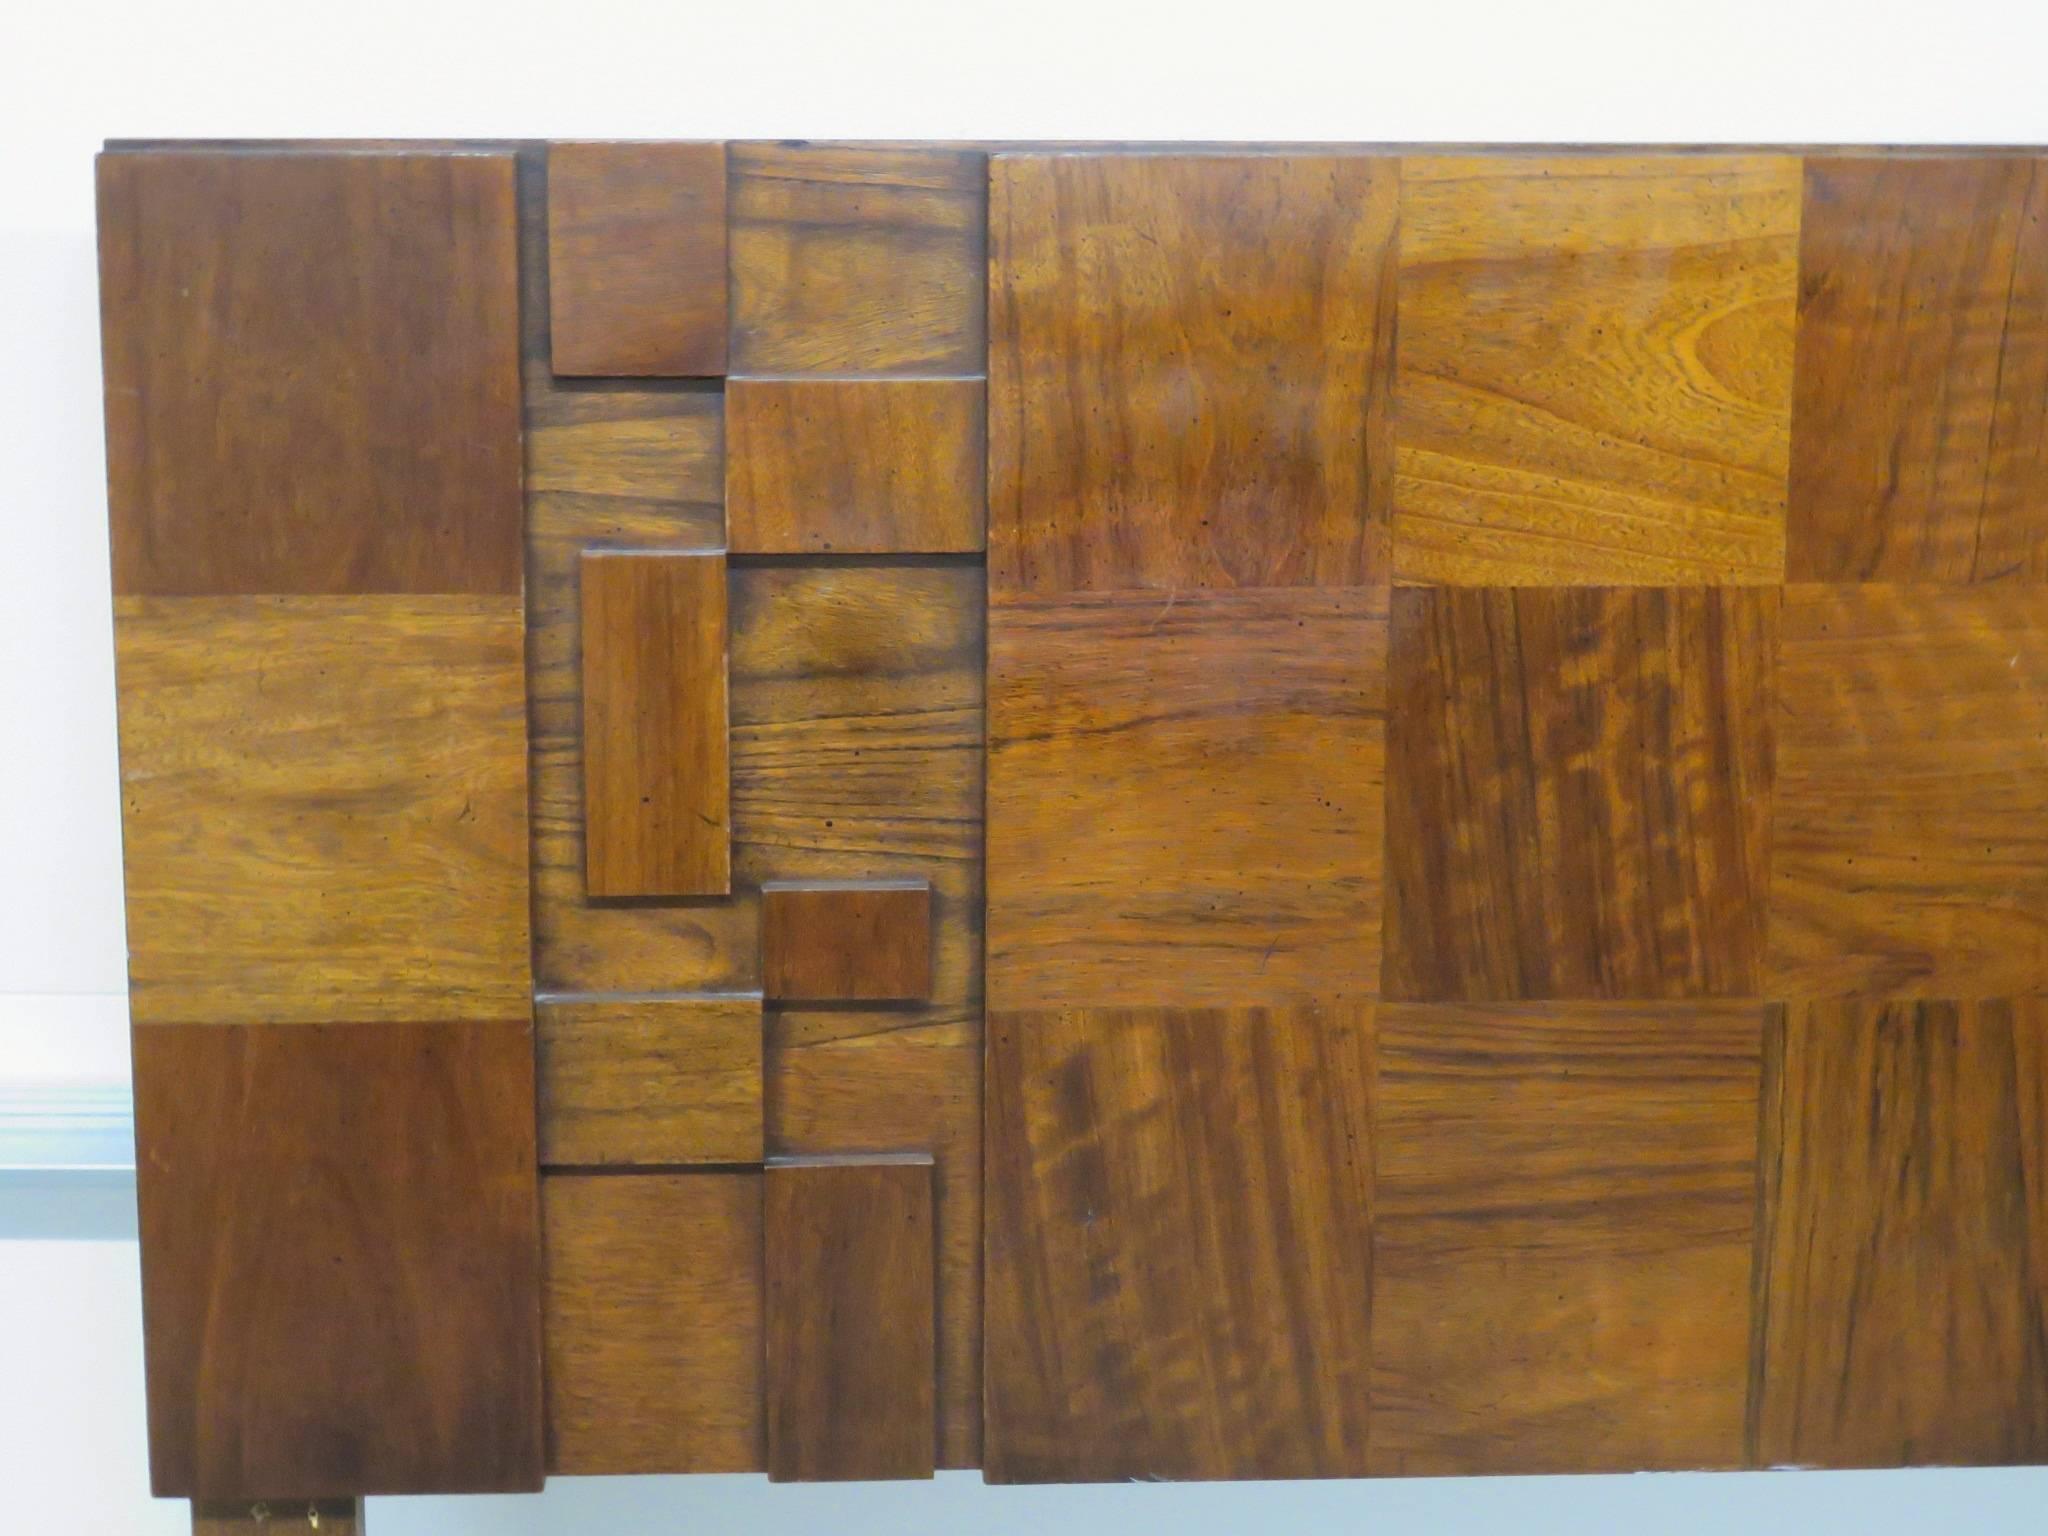 Headboard has a Brutalist style with walnut drawers. Manufactured by Lane Furniture Co from the 